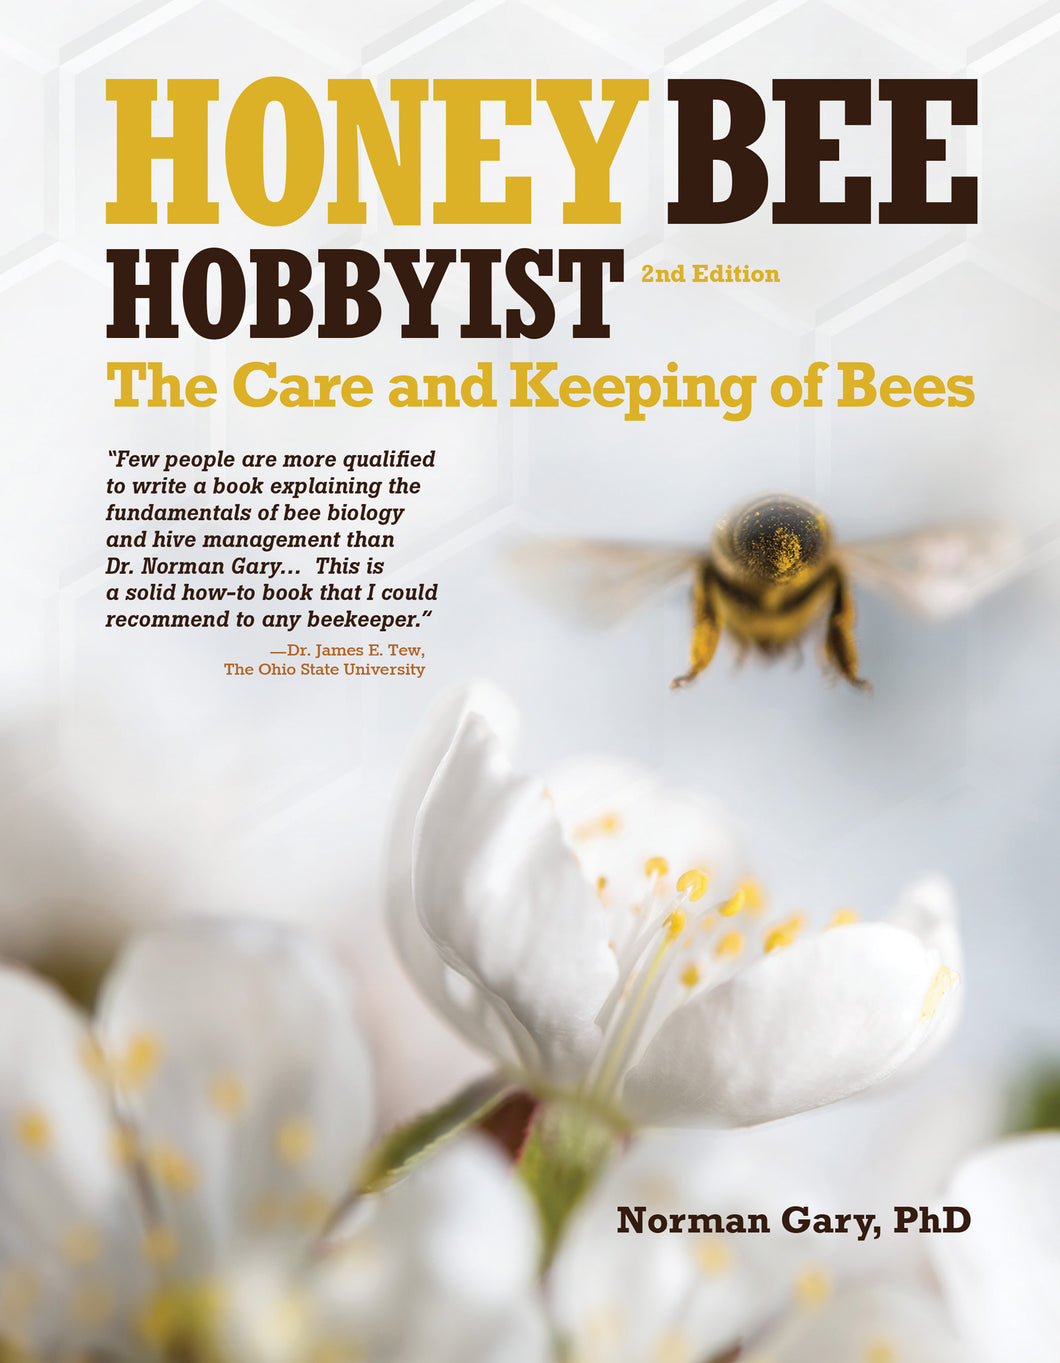 Honey Bee Hobbyist, 2nd Edition : The Care and Keeping of Bees